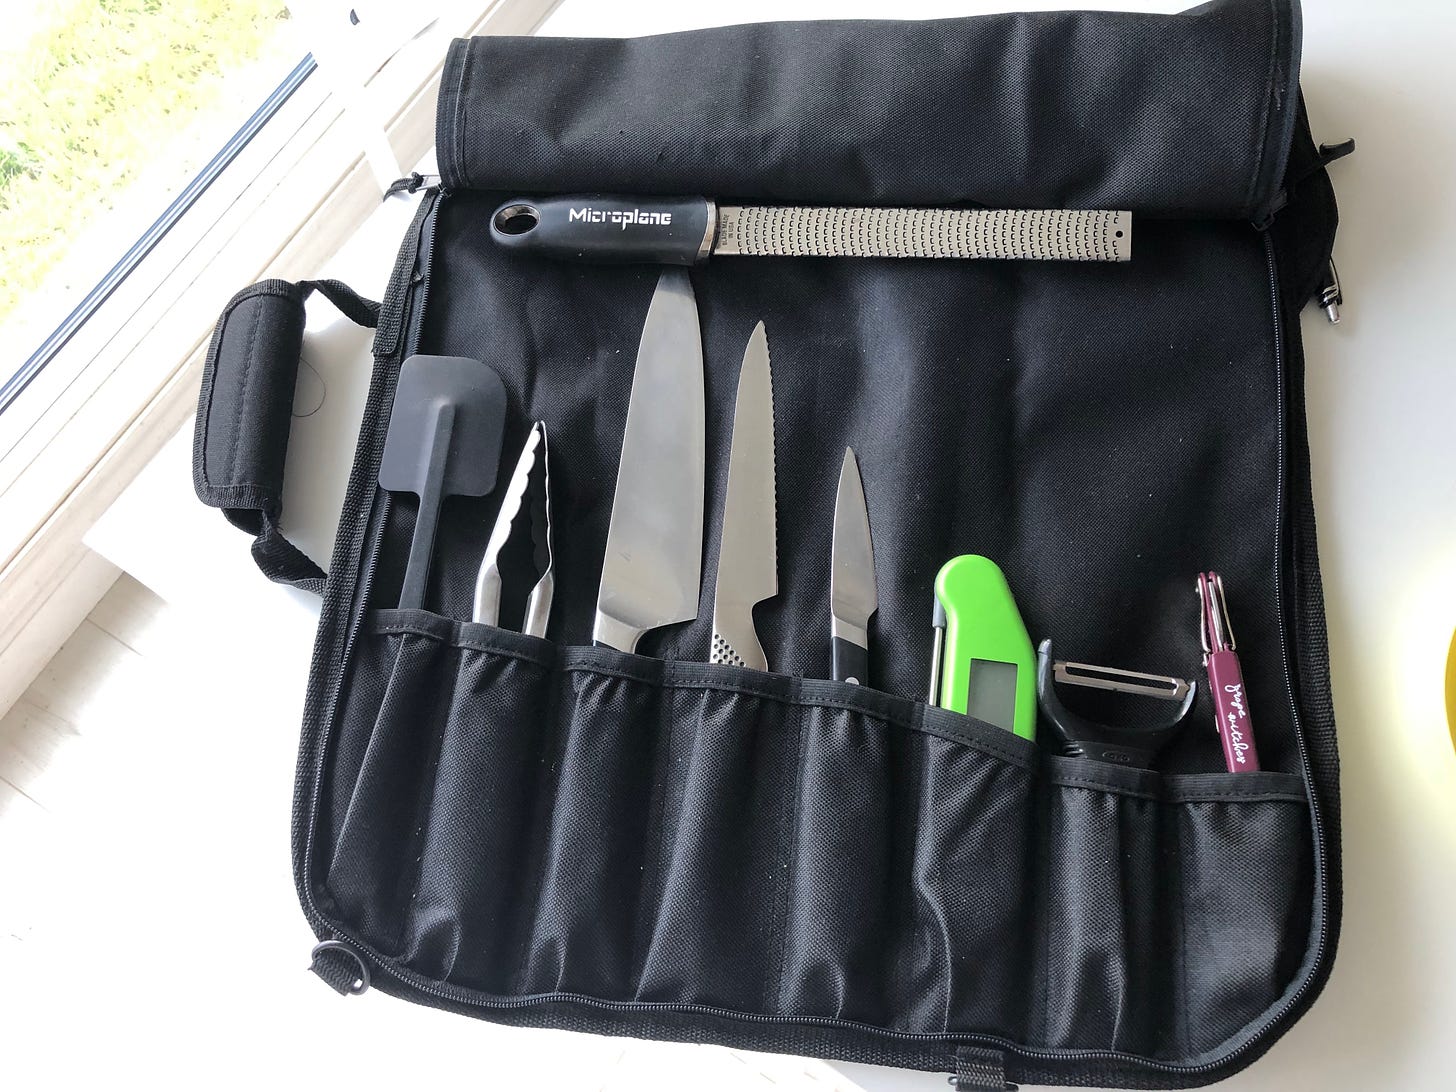 A nylon knife roll containing essential kitchen equipment